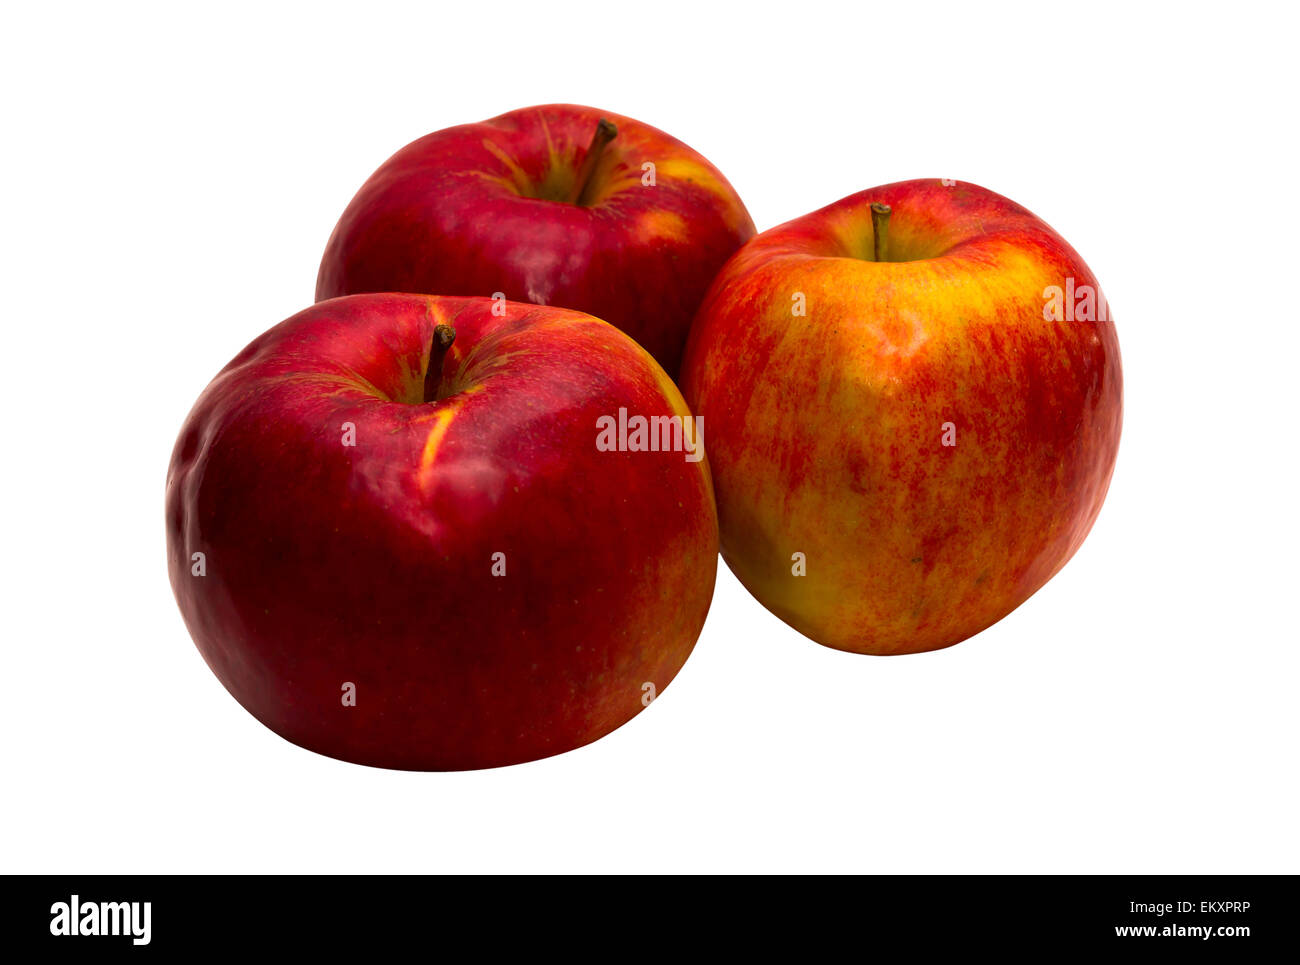 Three прексрасных Apple, as the three Jolly friend. Great mood, easy stomach and bright minds! Stock Photo